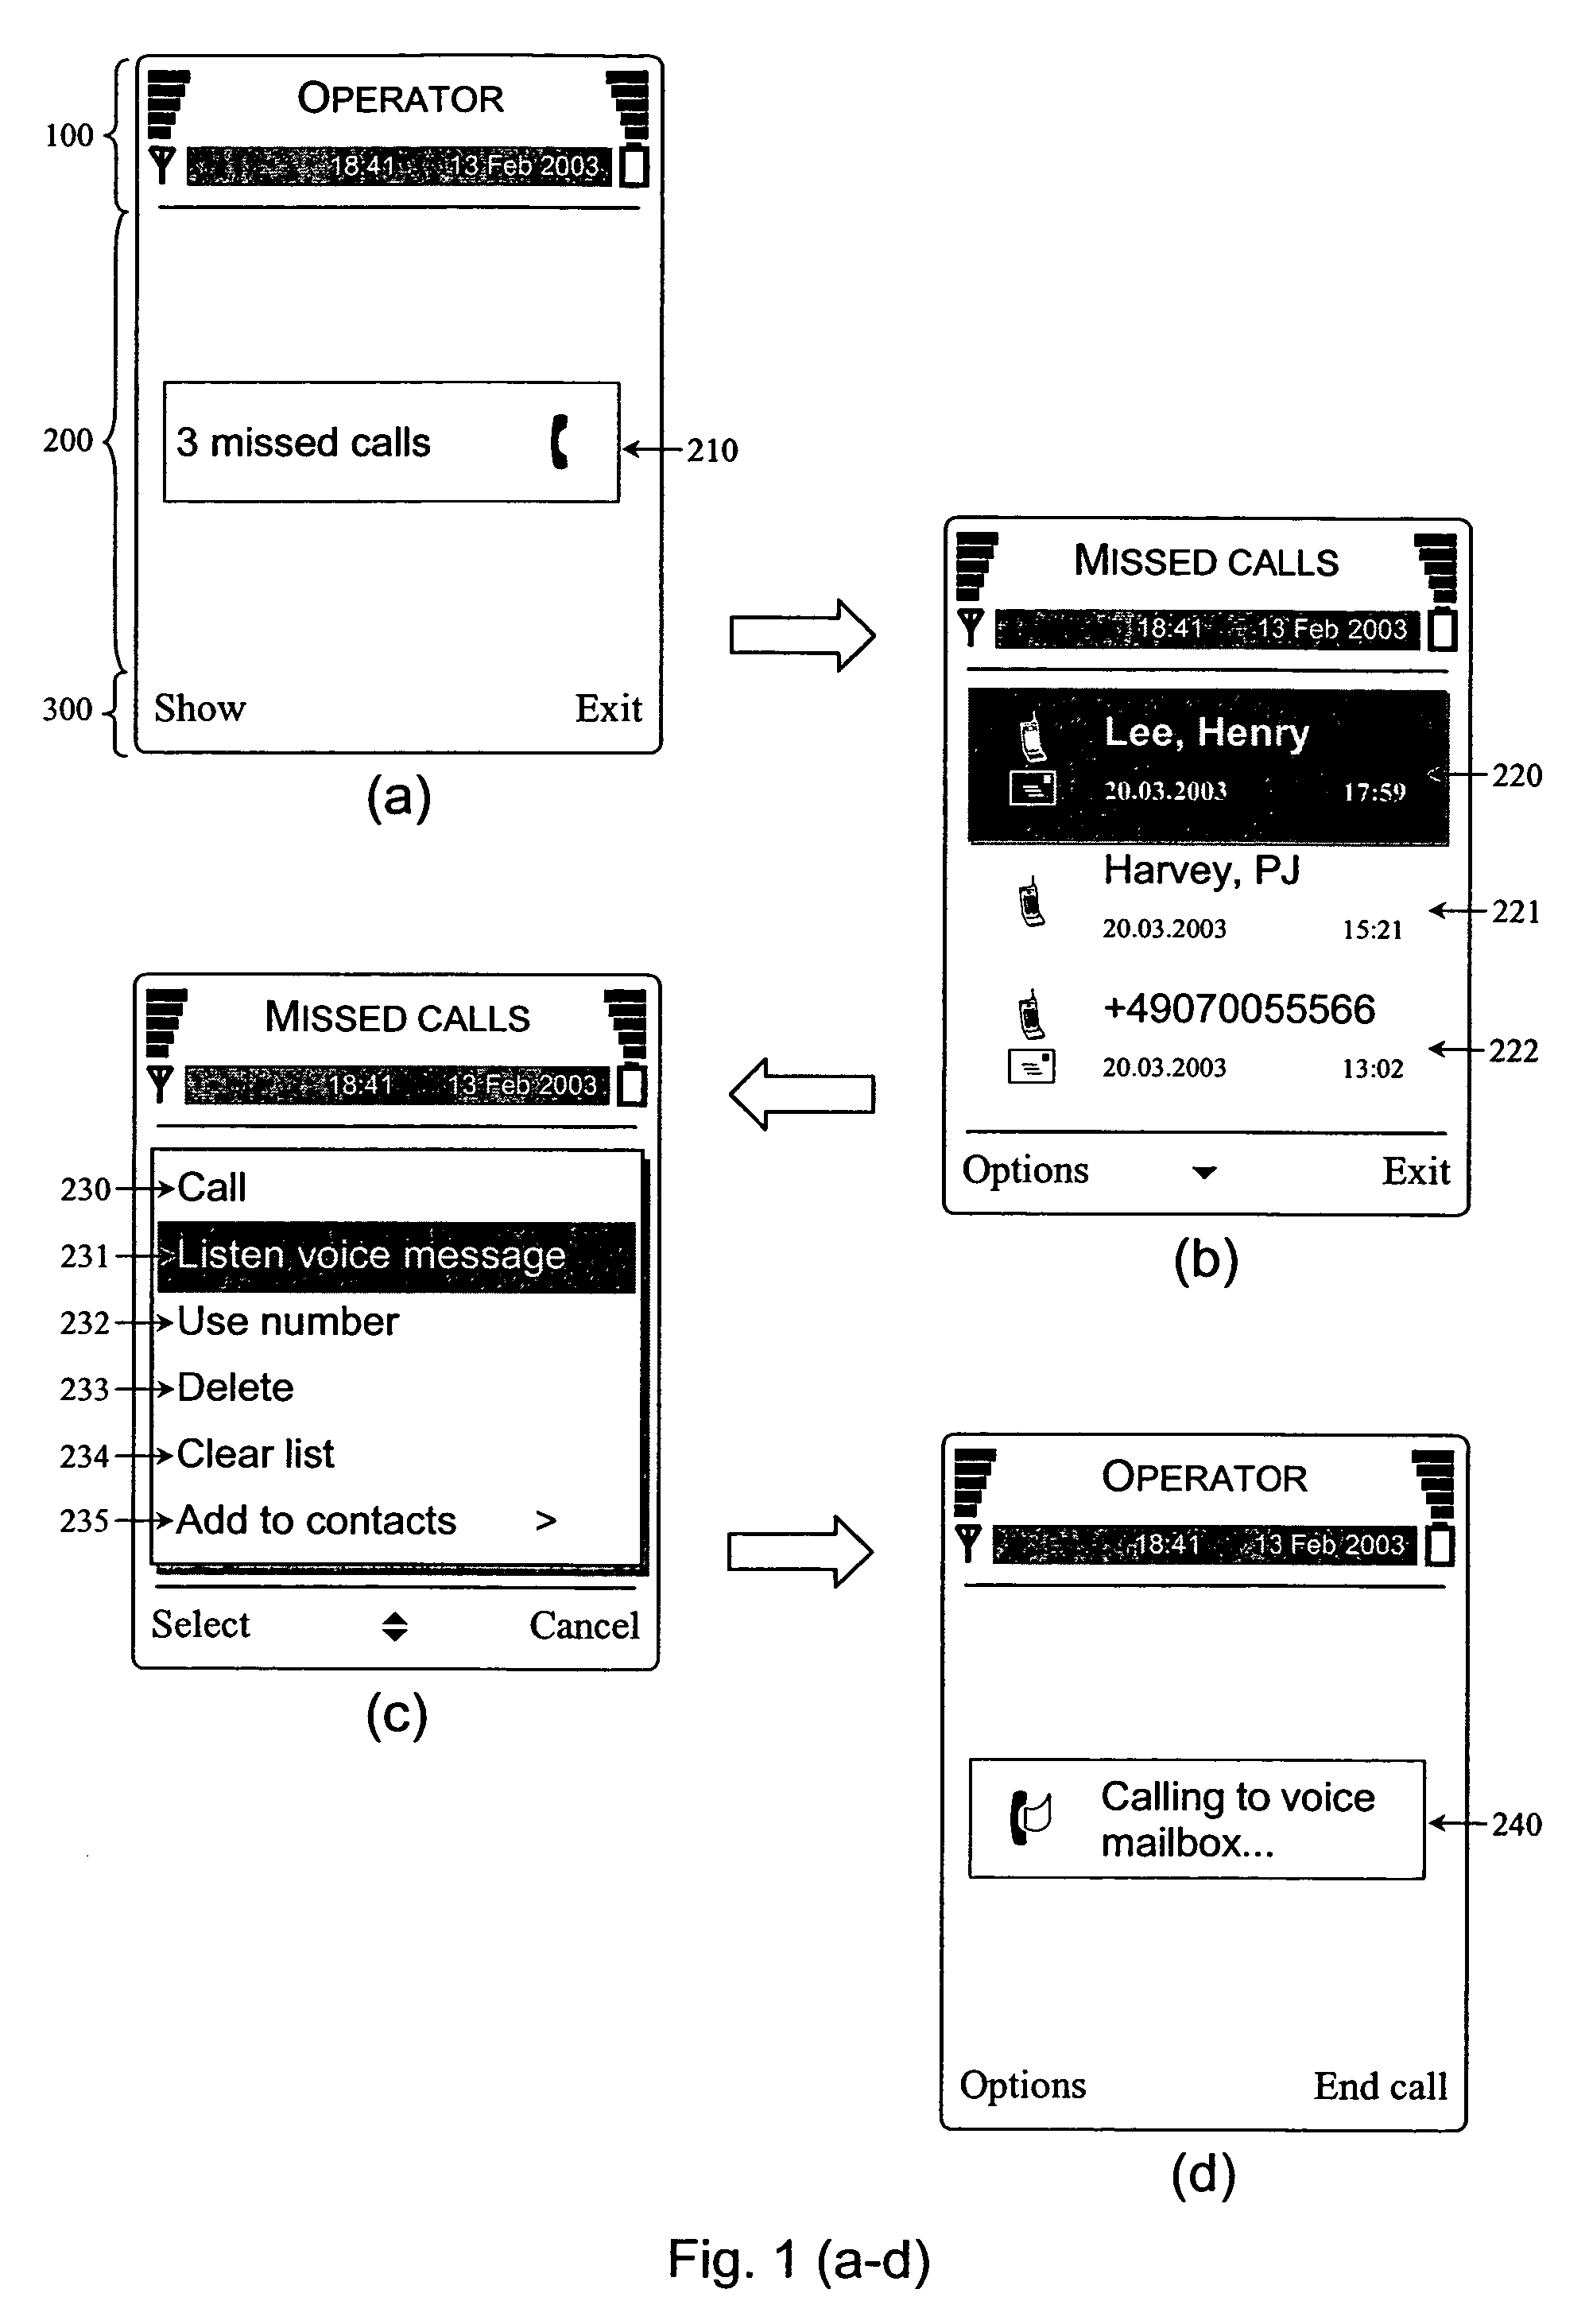 Method and device for handling missed calls in a mobile communications environment